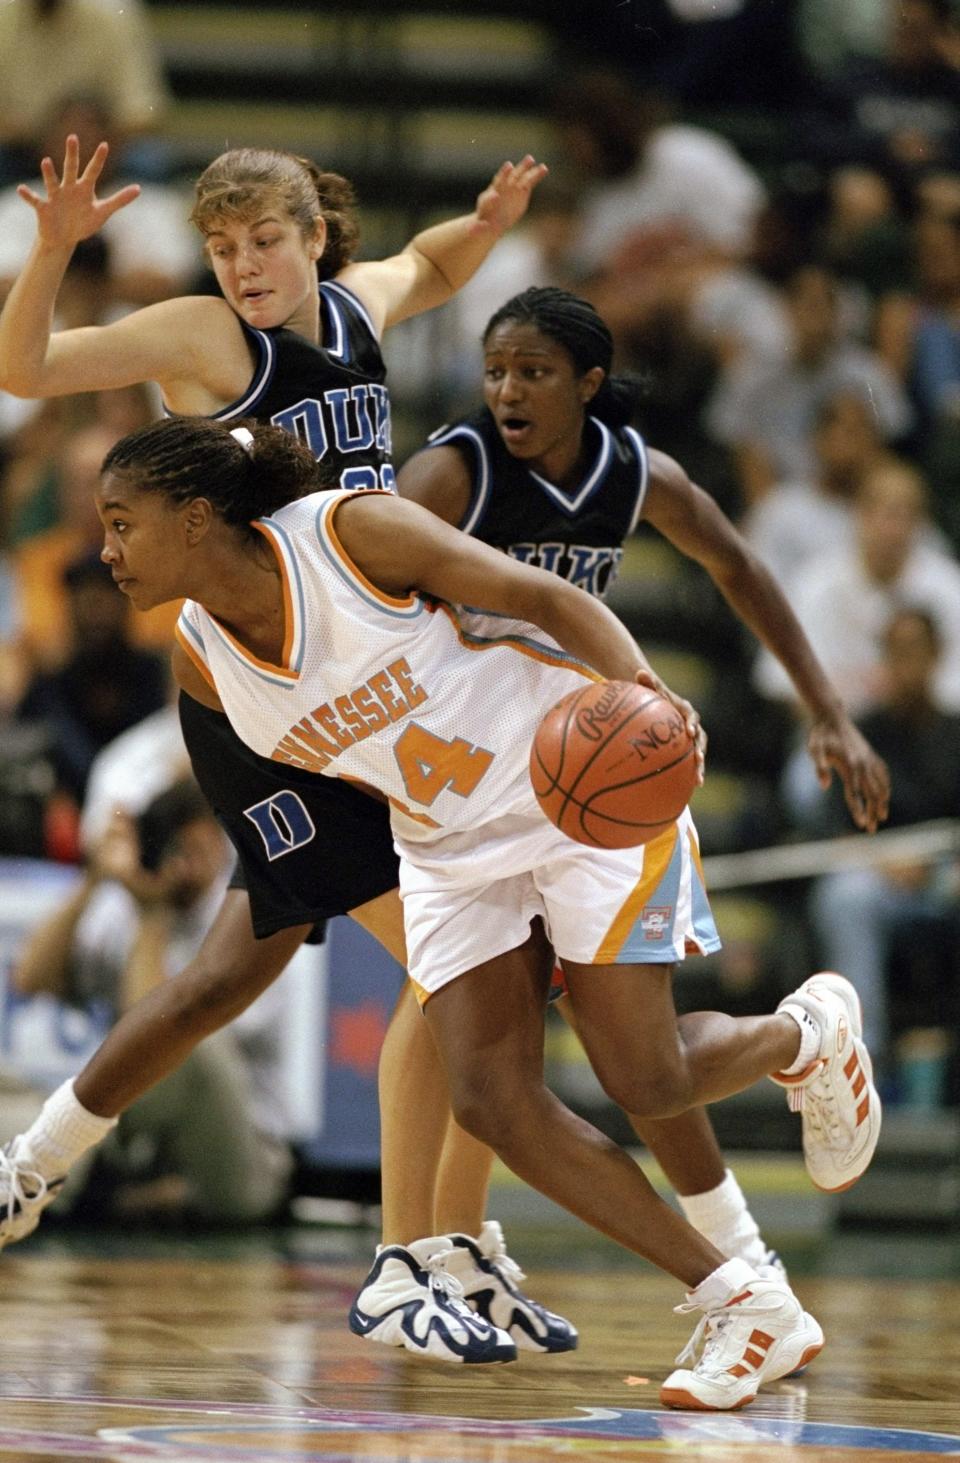 The Lady Vols' white uniform, shown here on Tamika Catchings, was also very well done.